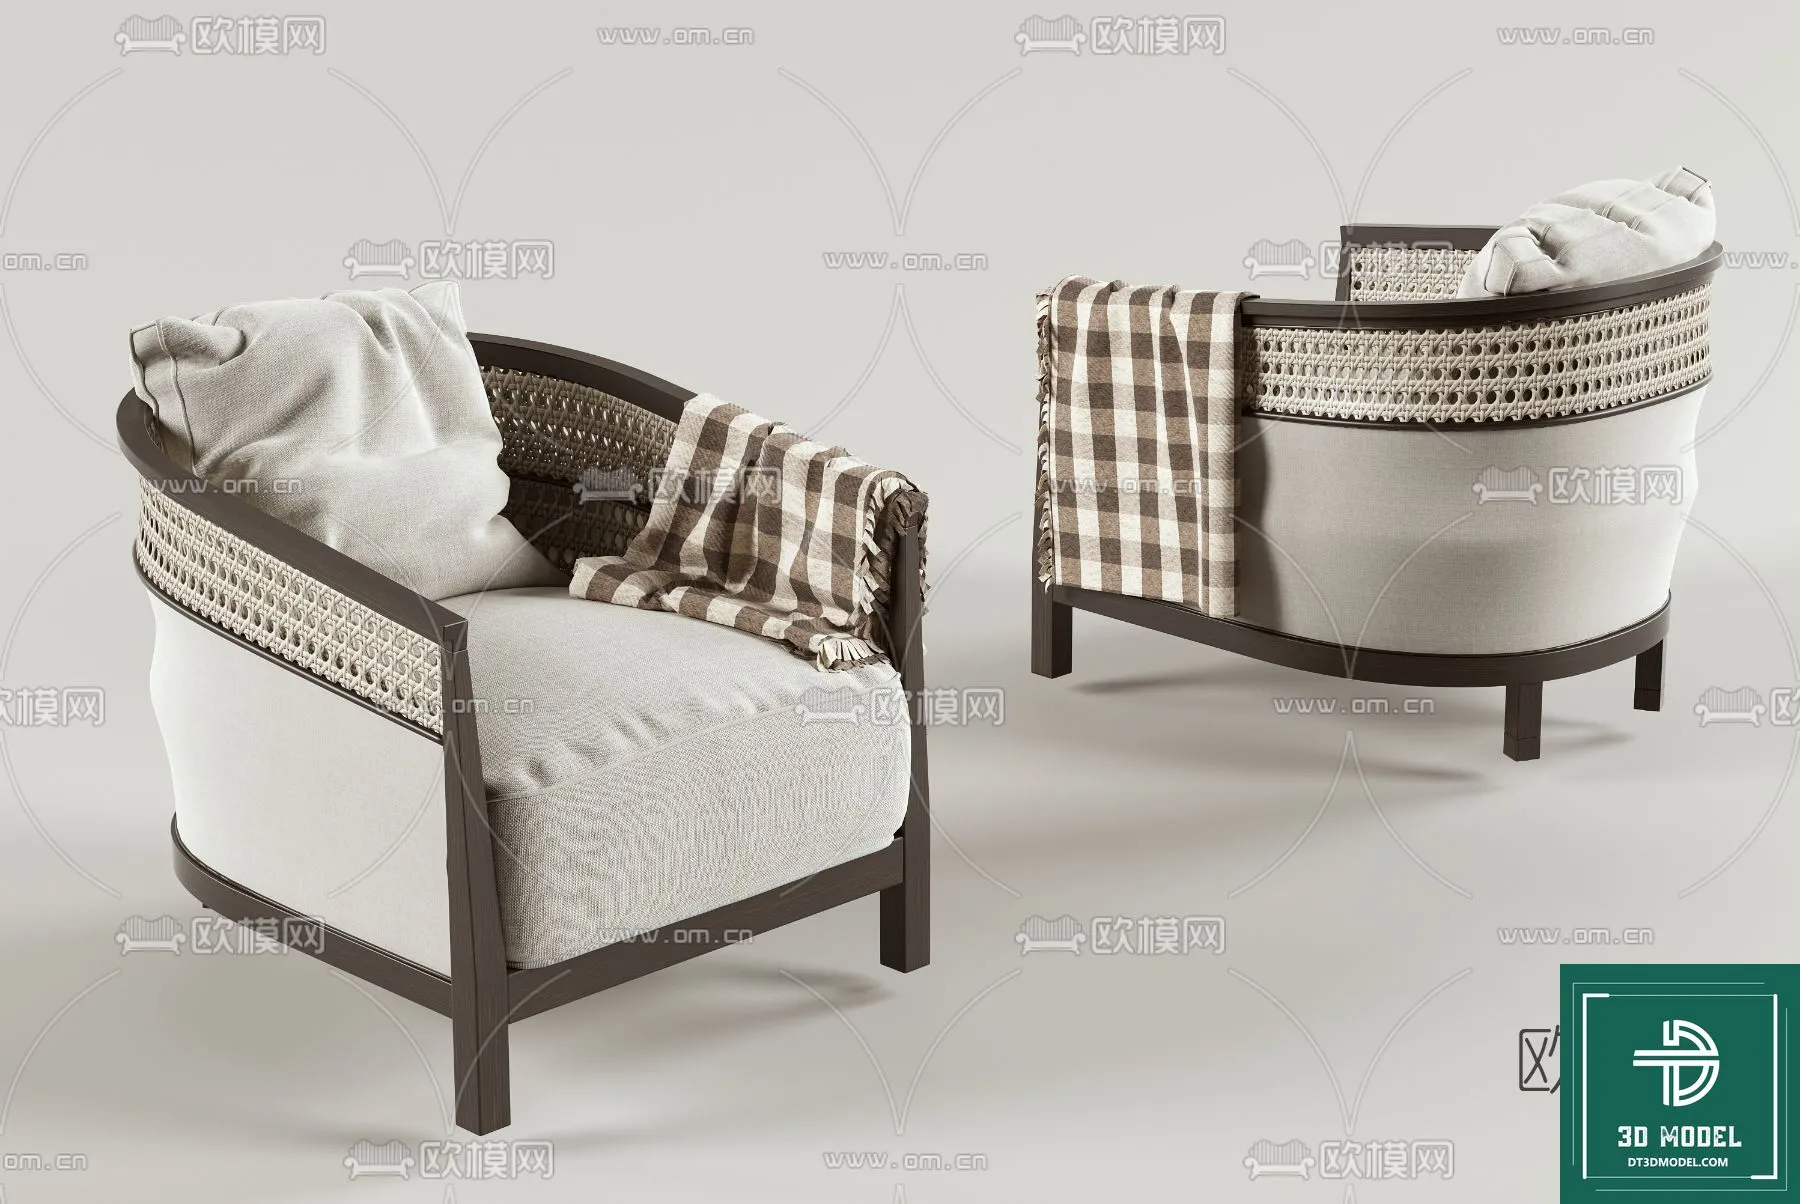 INDOCHINE STYLE – 3D MODELS – 739